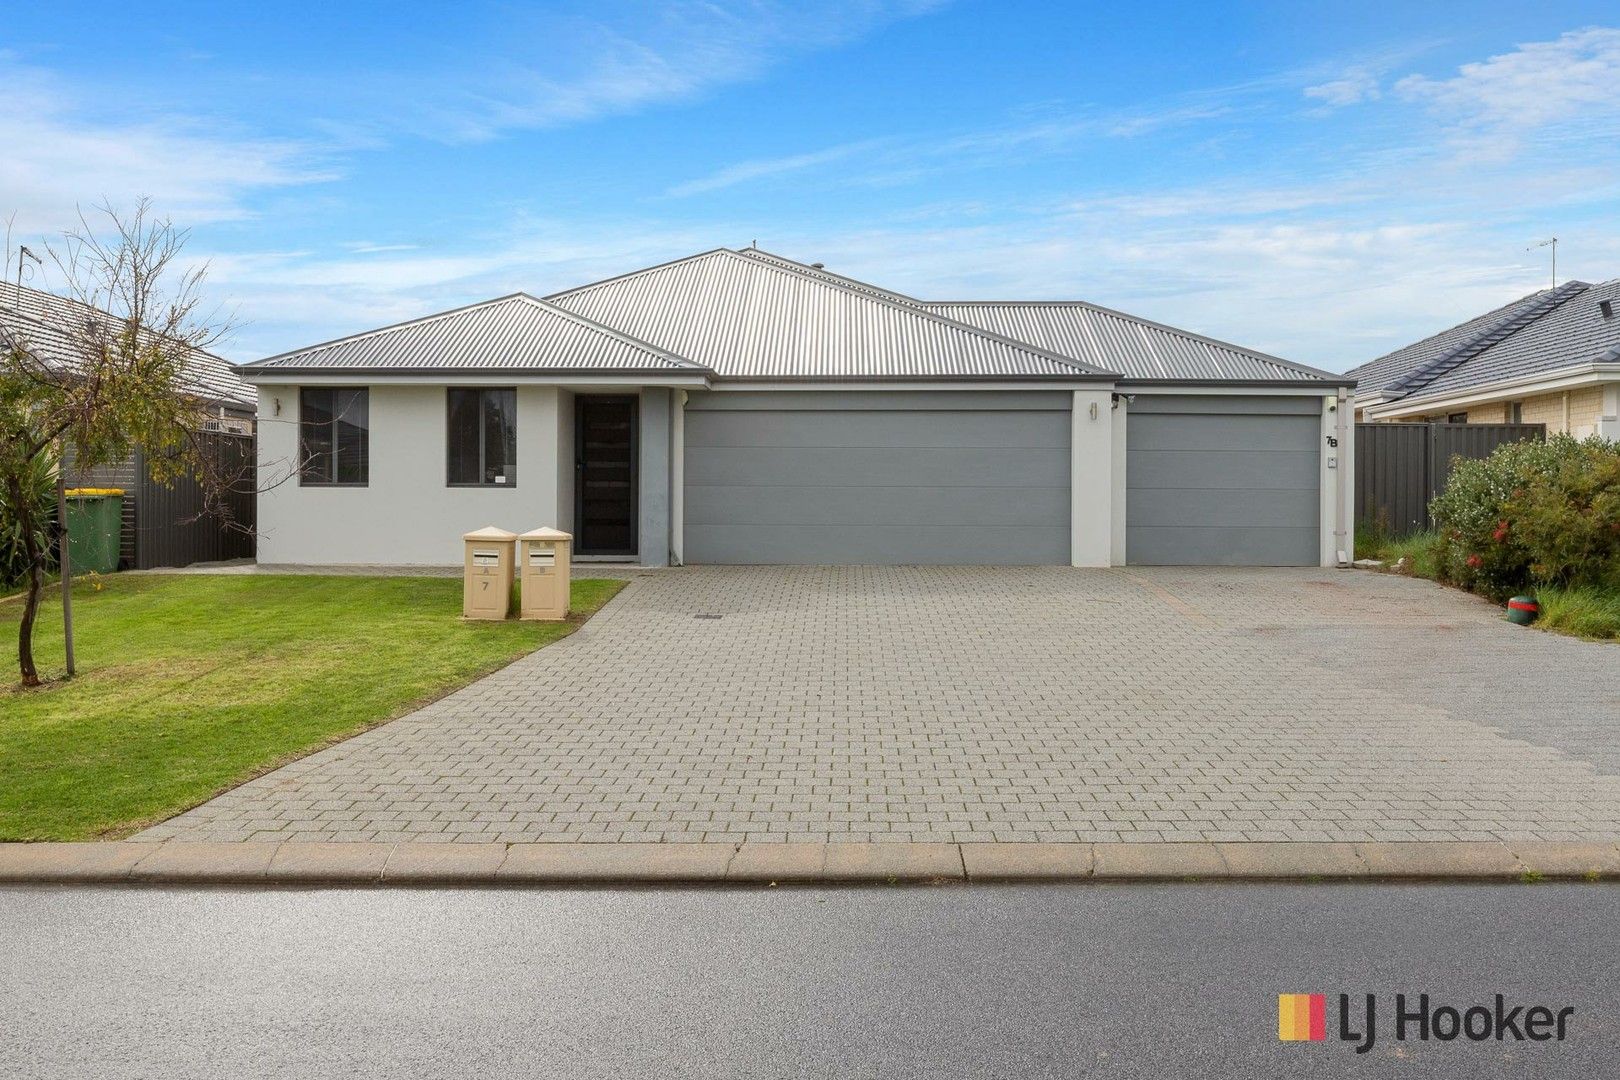 5 bedrooms House in 7 Fallon Place SEVILLE GROVE WA, 6112